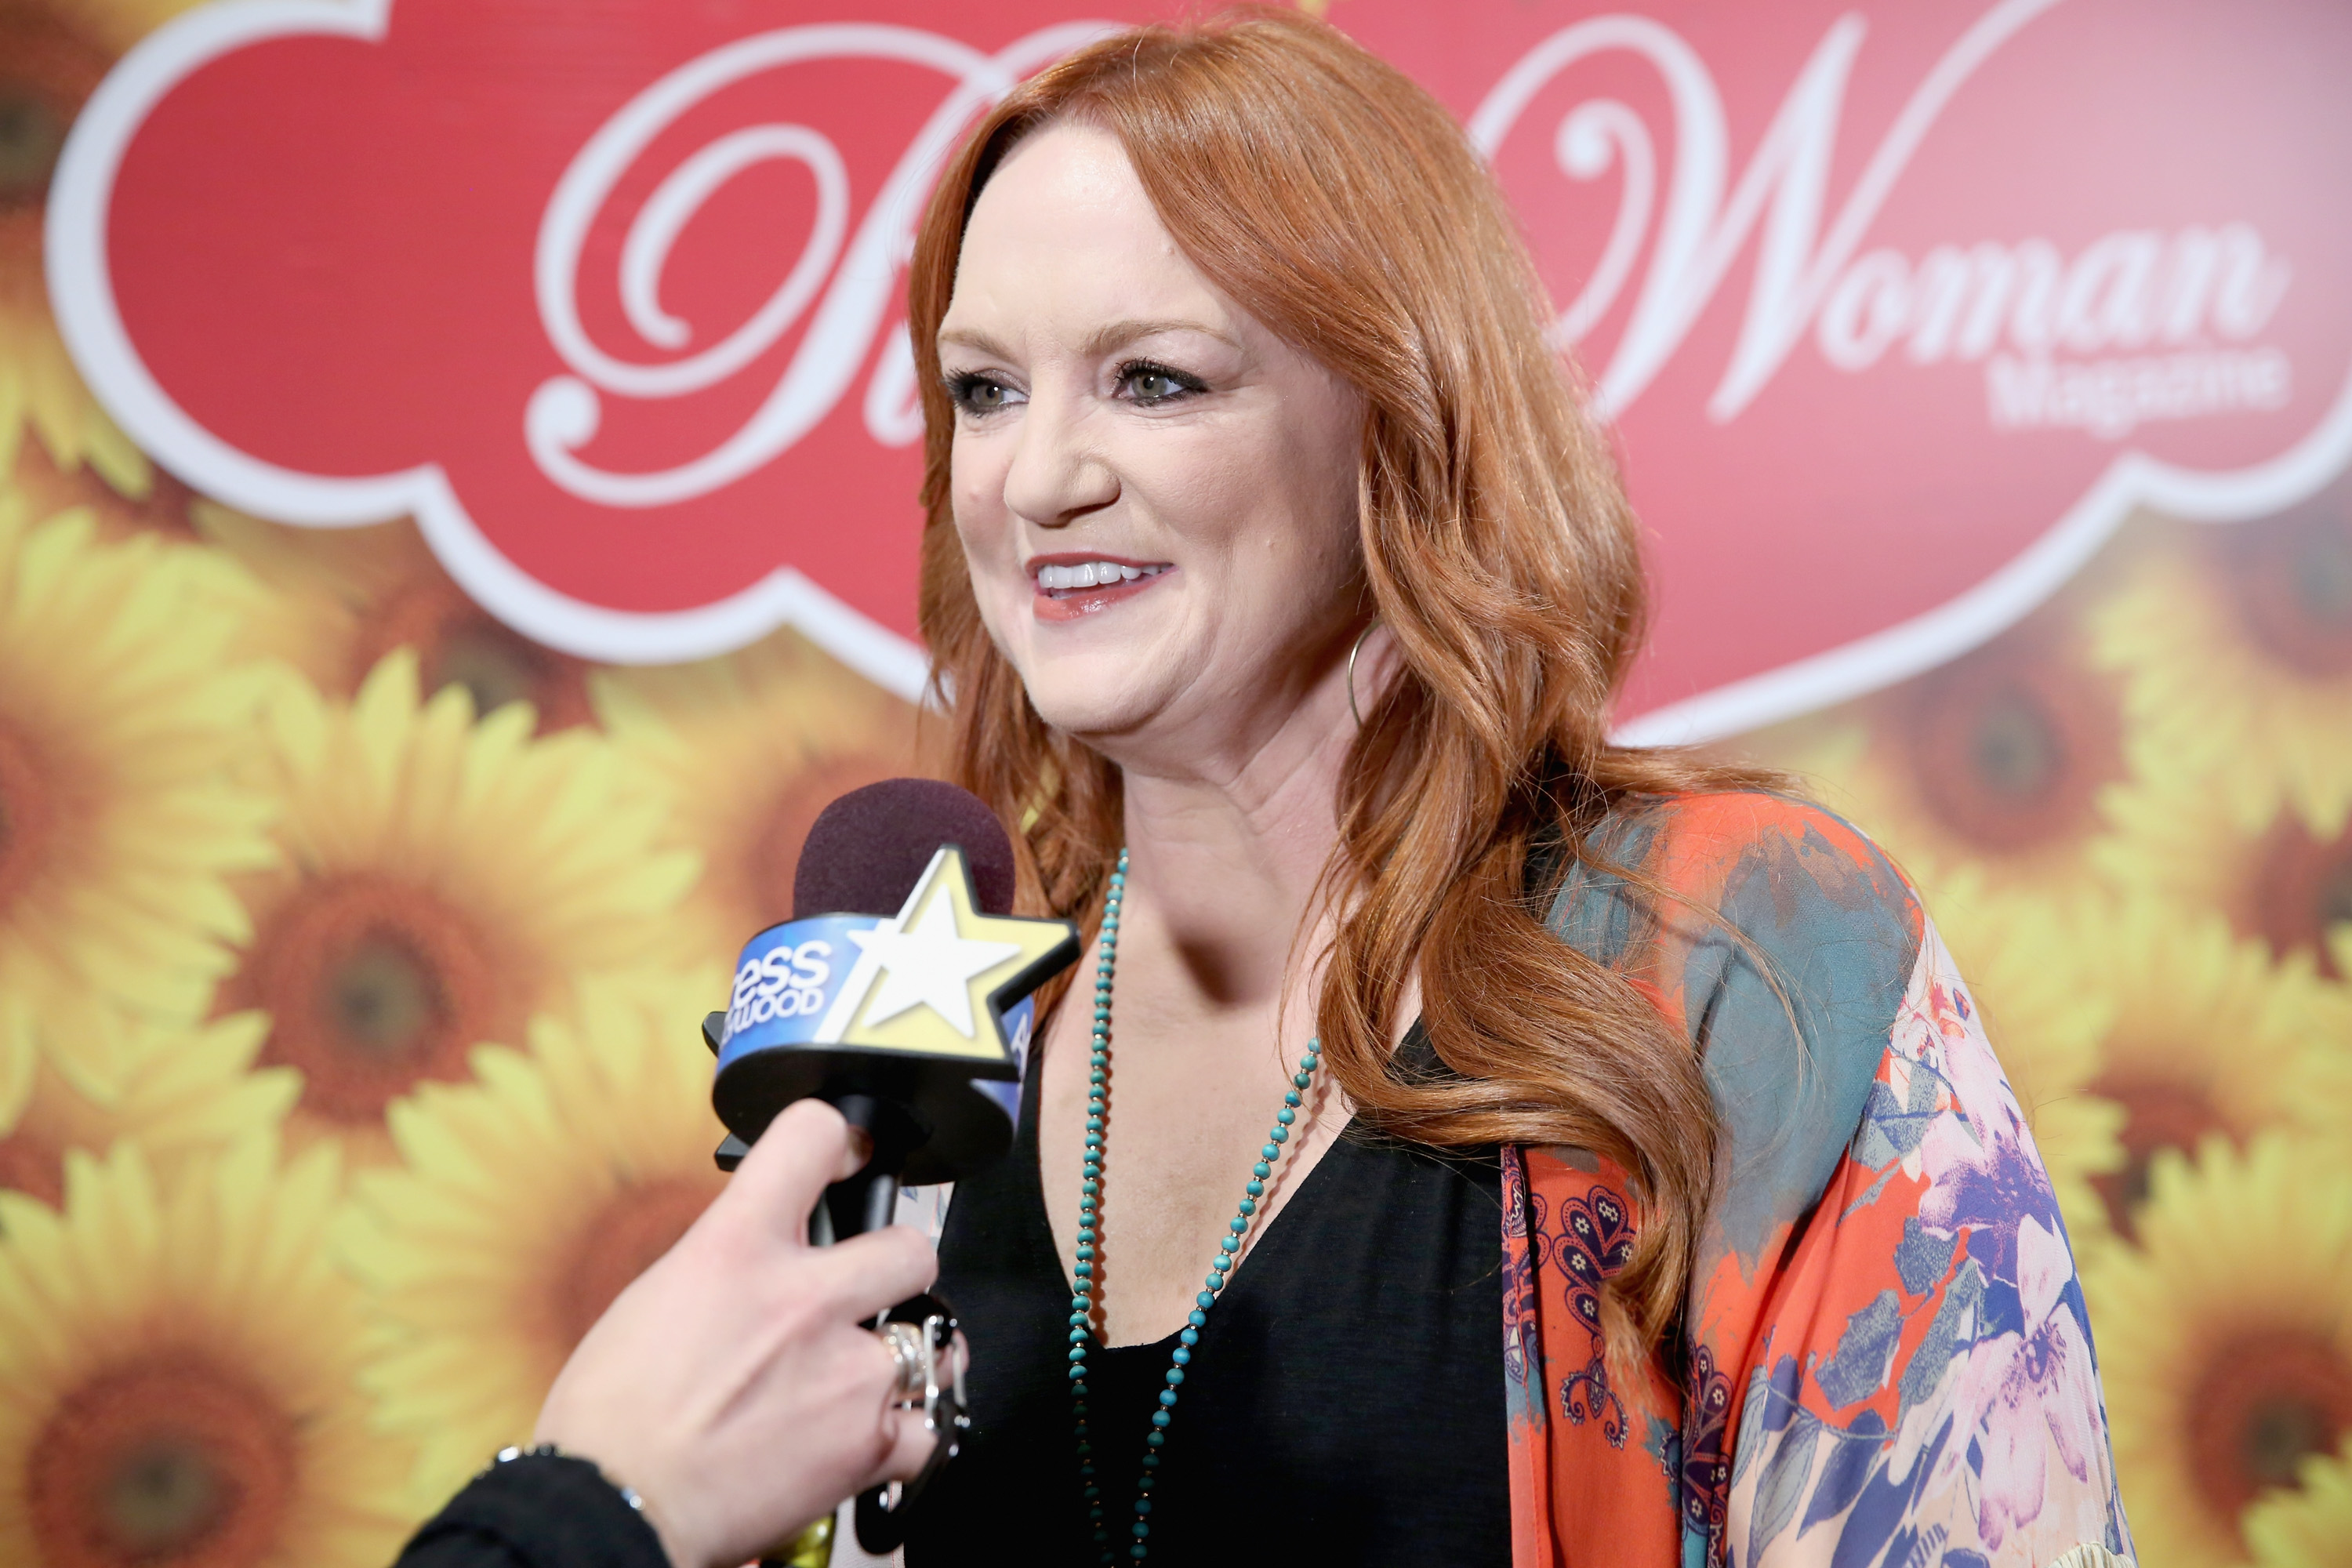  Ree Drummond attends The Pioneer Woman Magazine Celebration 